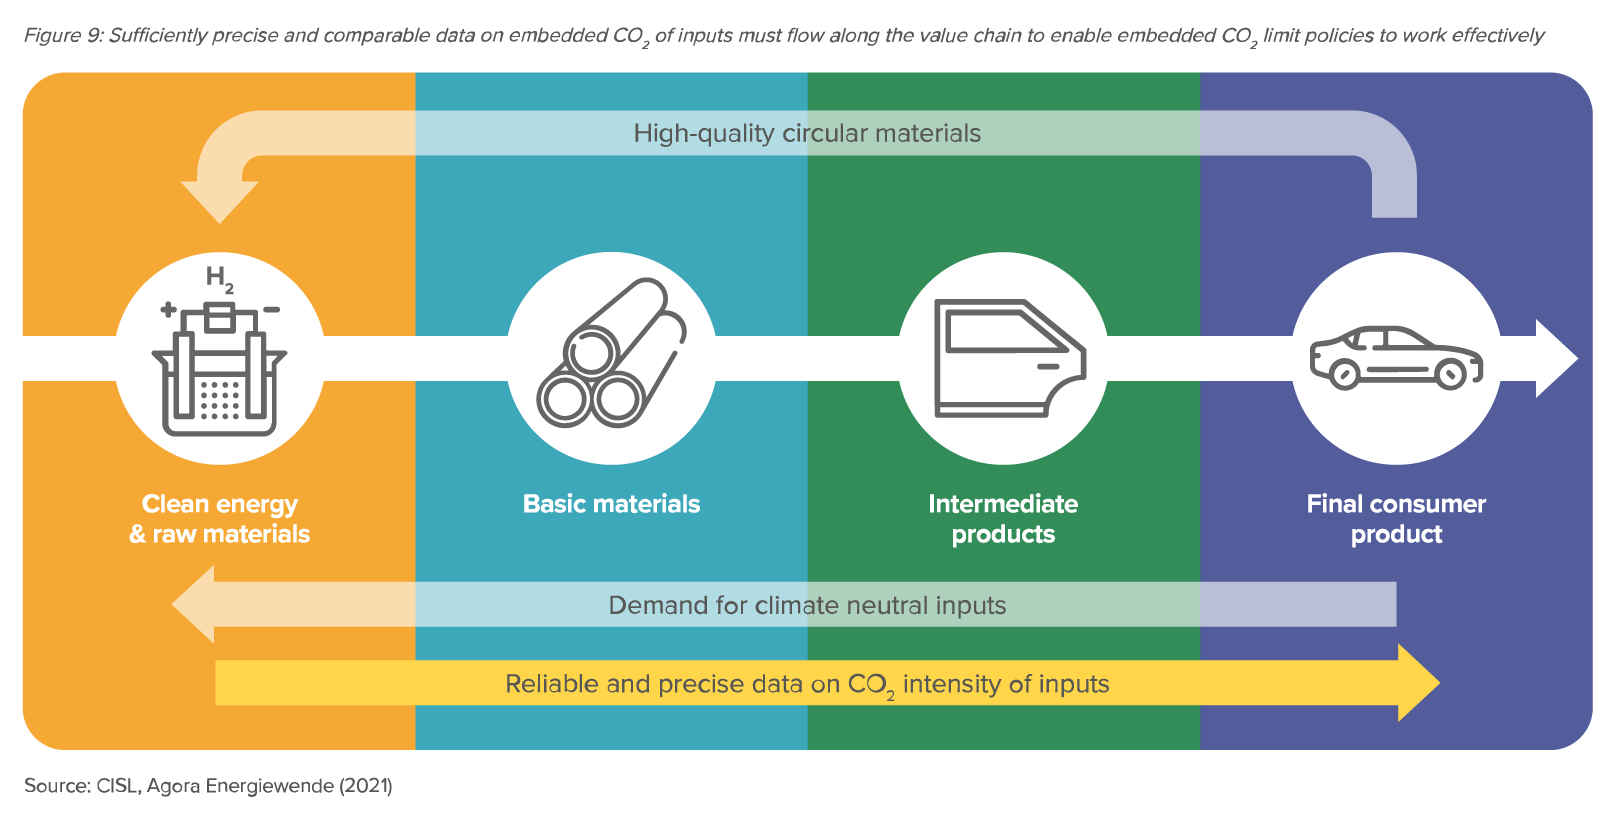 Preview for Sufficiently precise and comparable data on embedded CO₂ of inputs must flow along the value chain to enable embedded CO₂ limit policies to work effectively